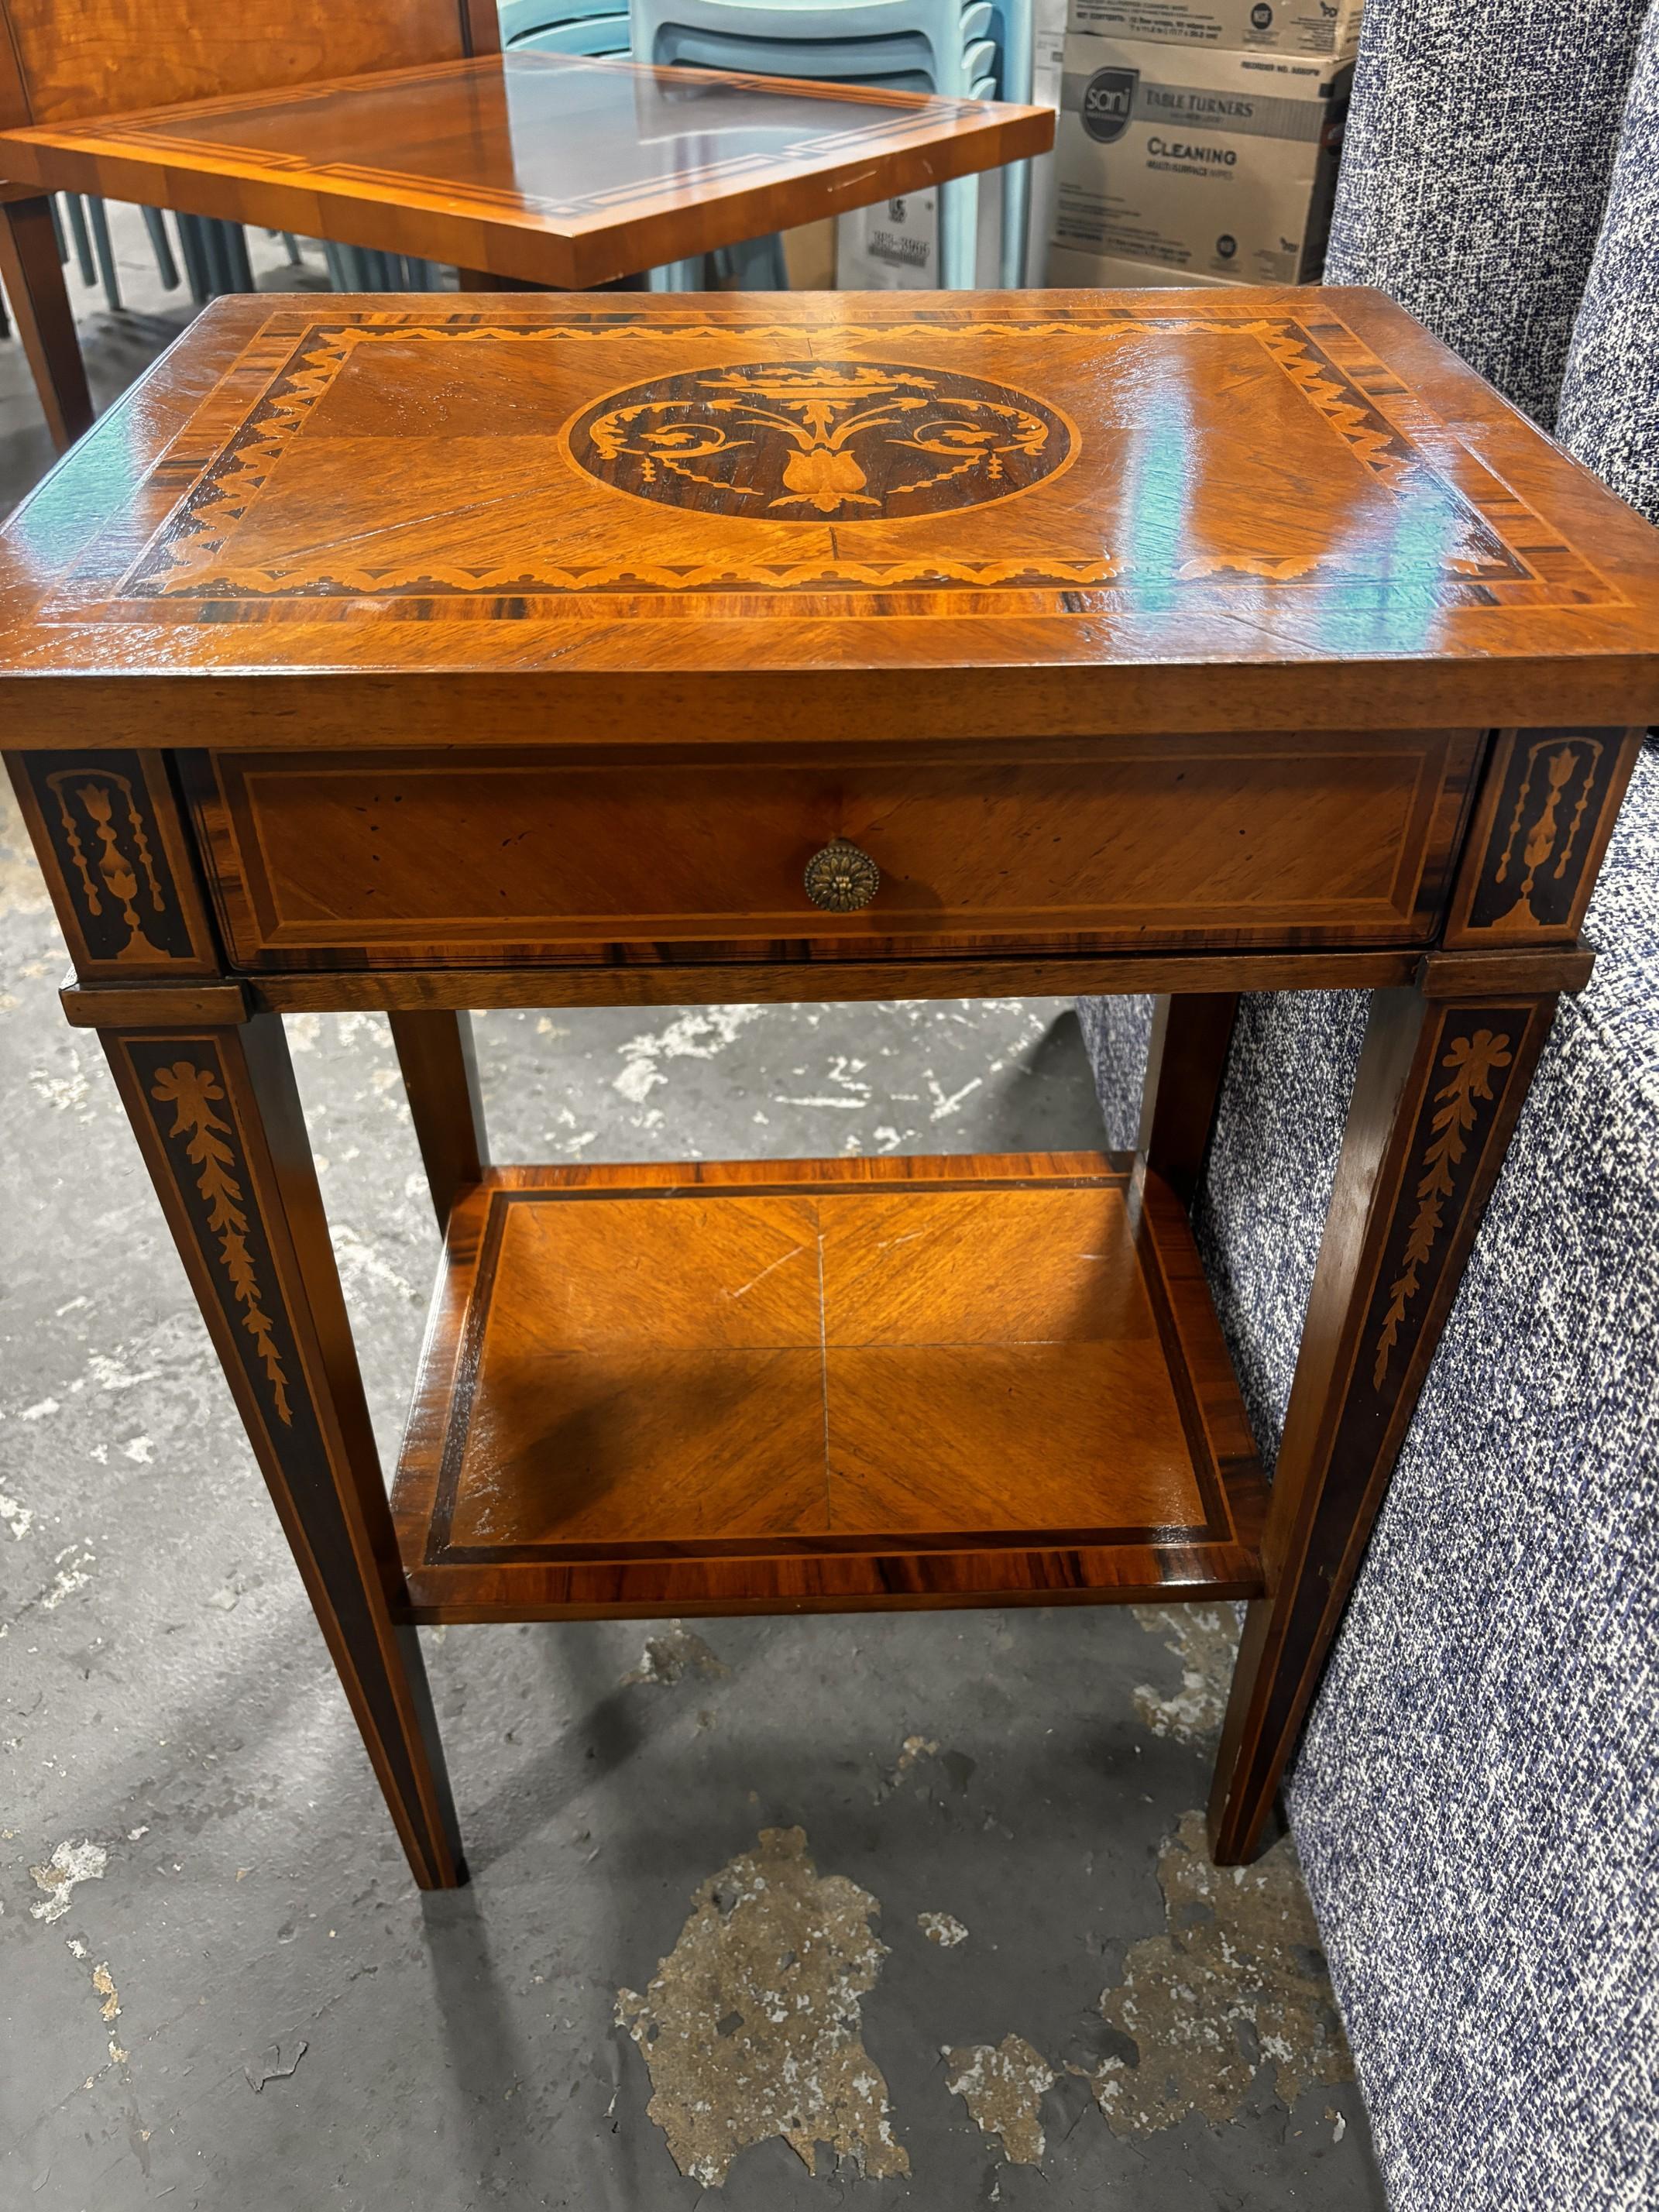 Antique Inlaid Wood Table W/ Brass Accents